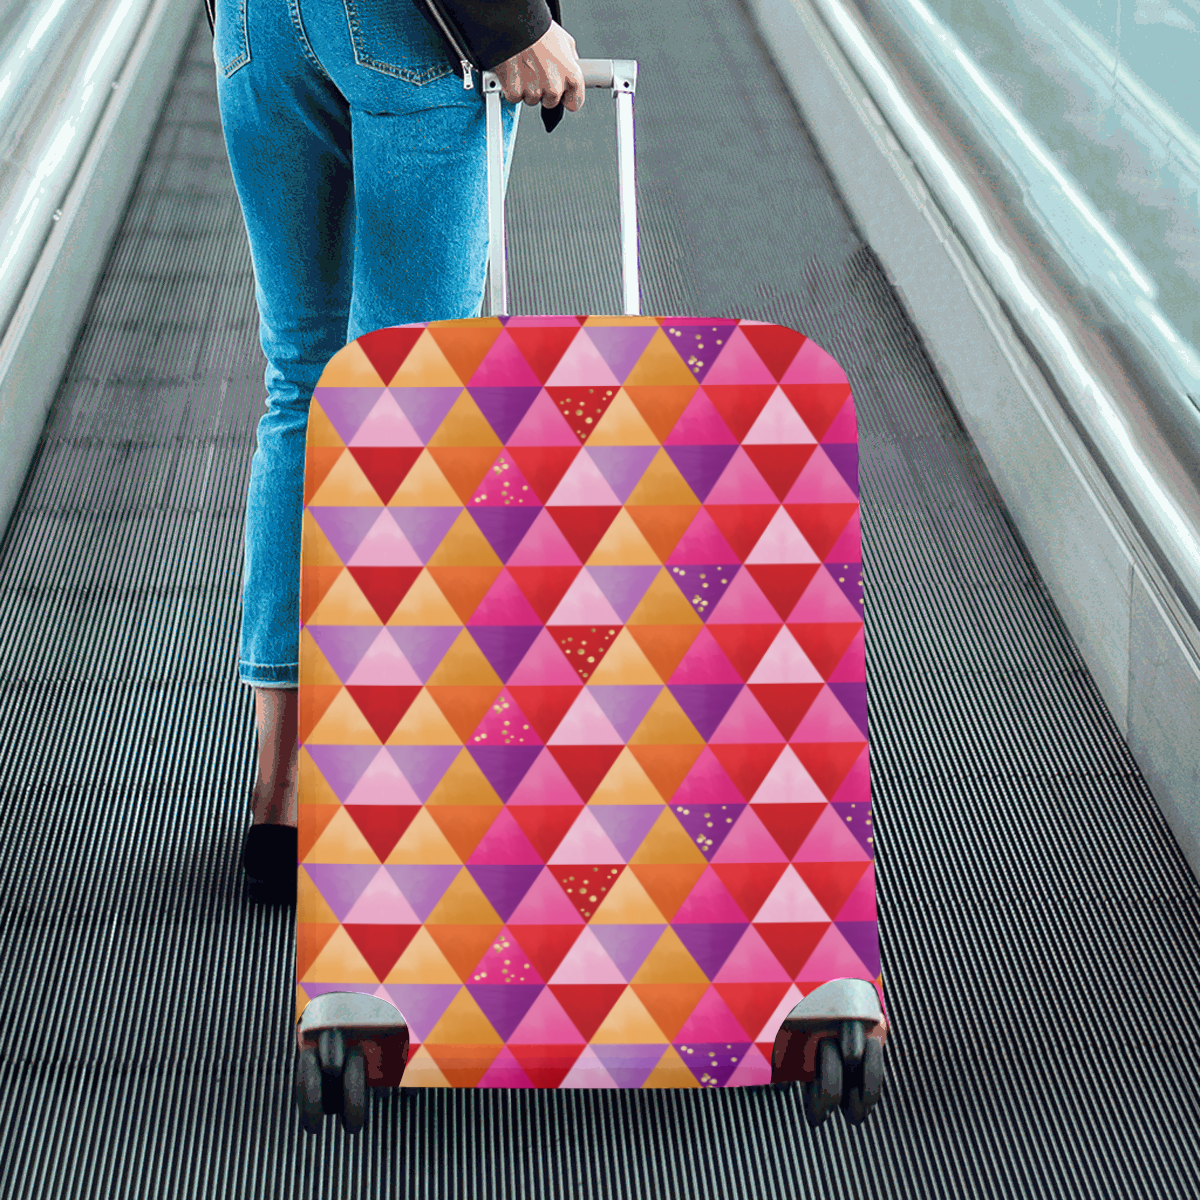 Triangle Pattern - Red Purple Pink Orange Yellow Luggage Cover/Large 26"-28"